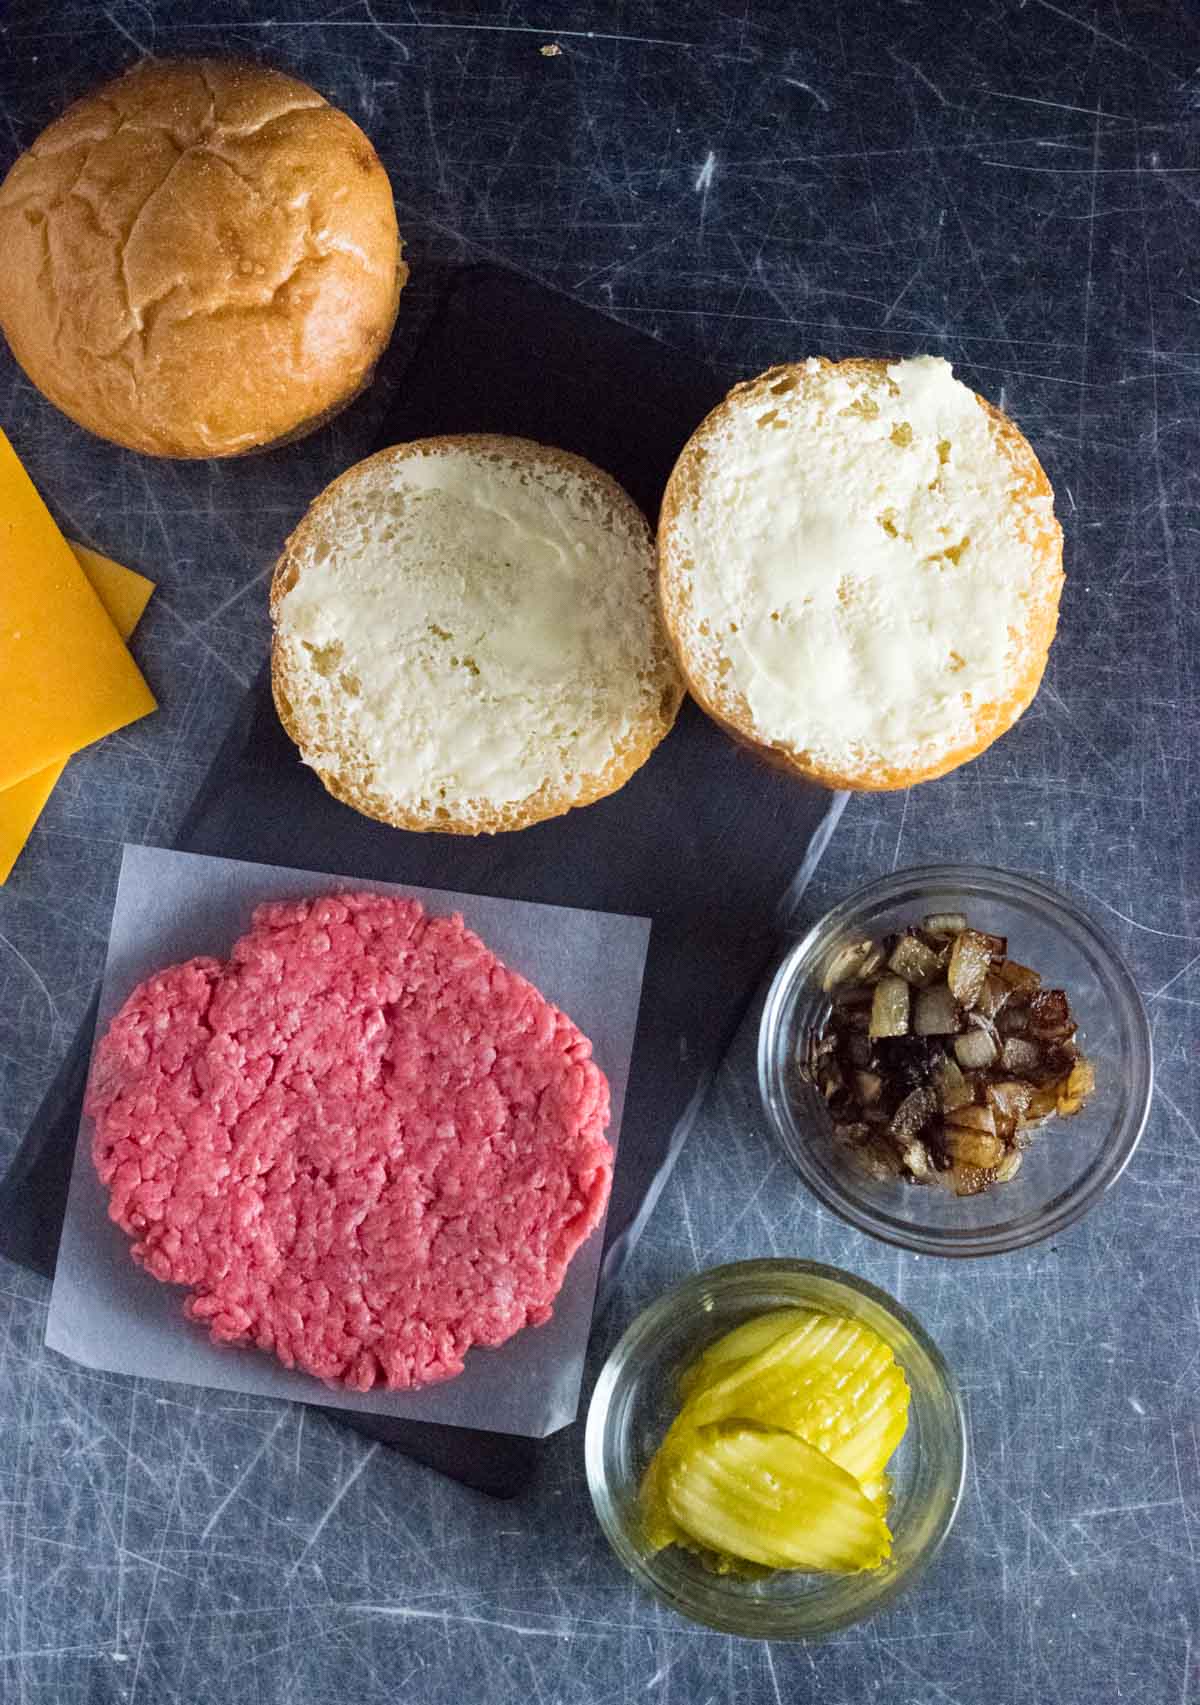 Showing Wisconsin butter burger ingredients.